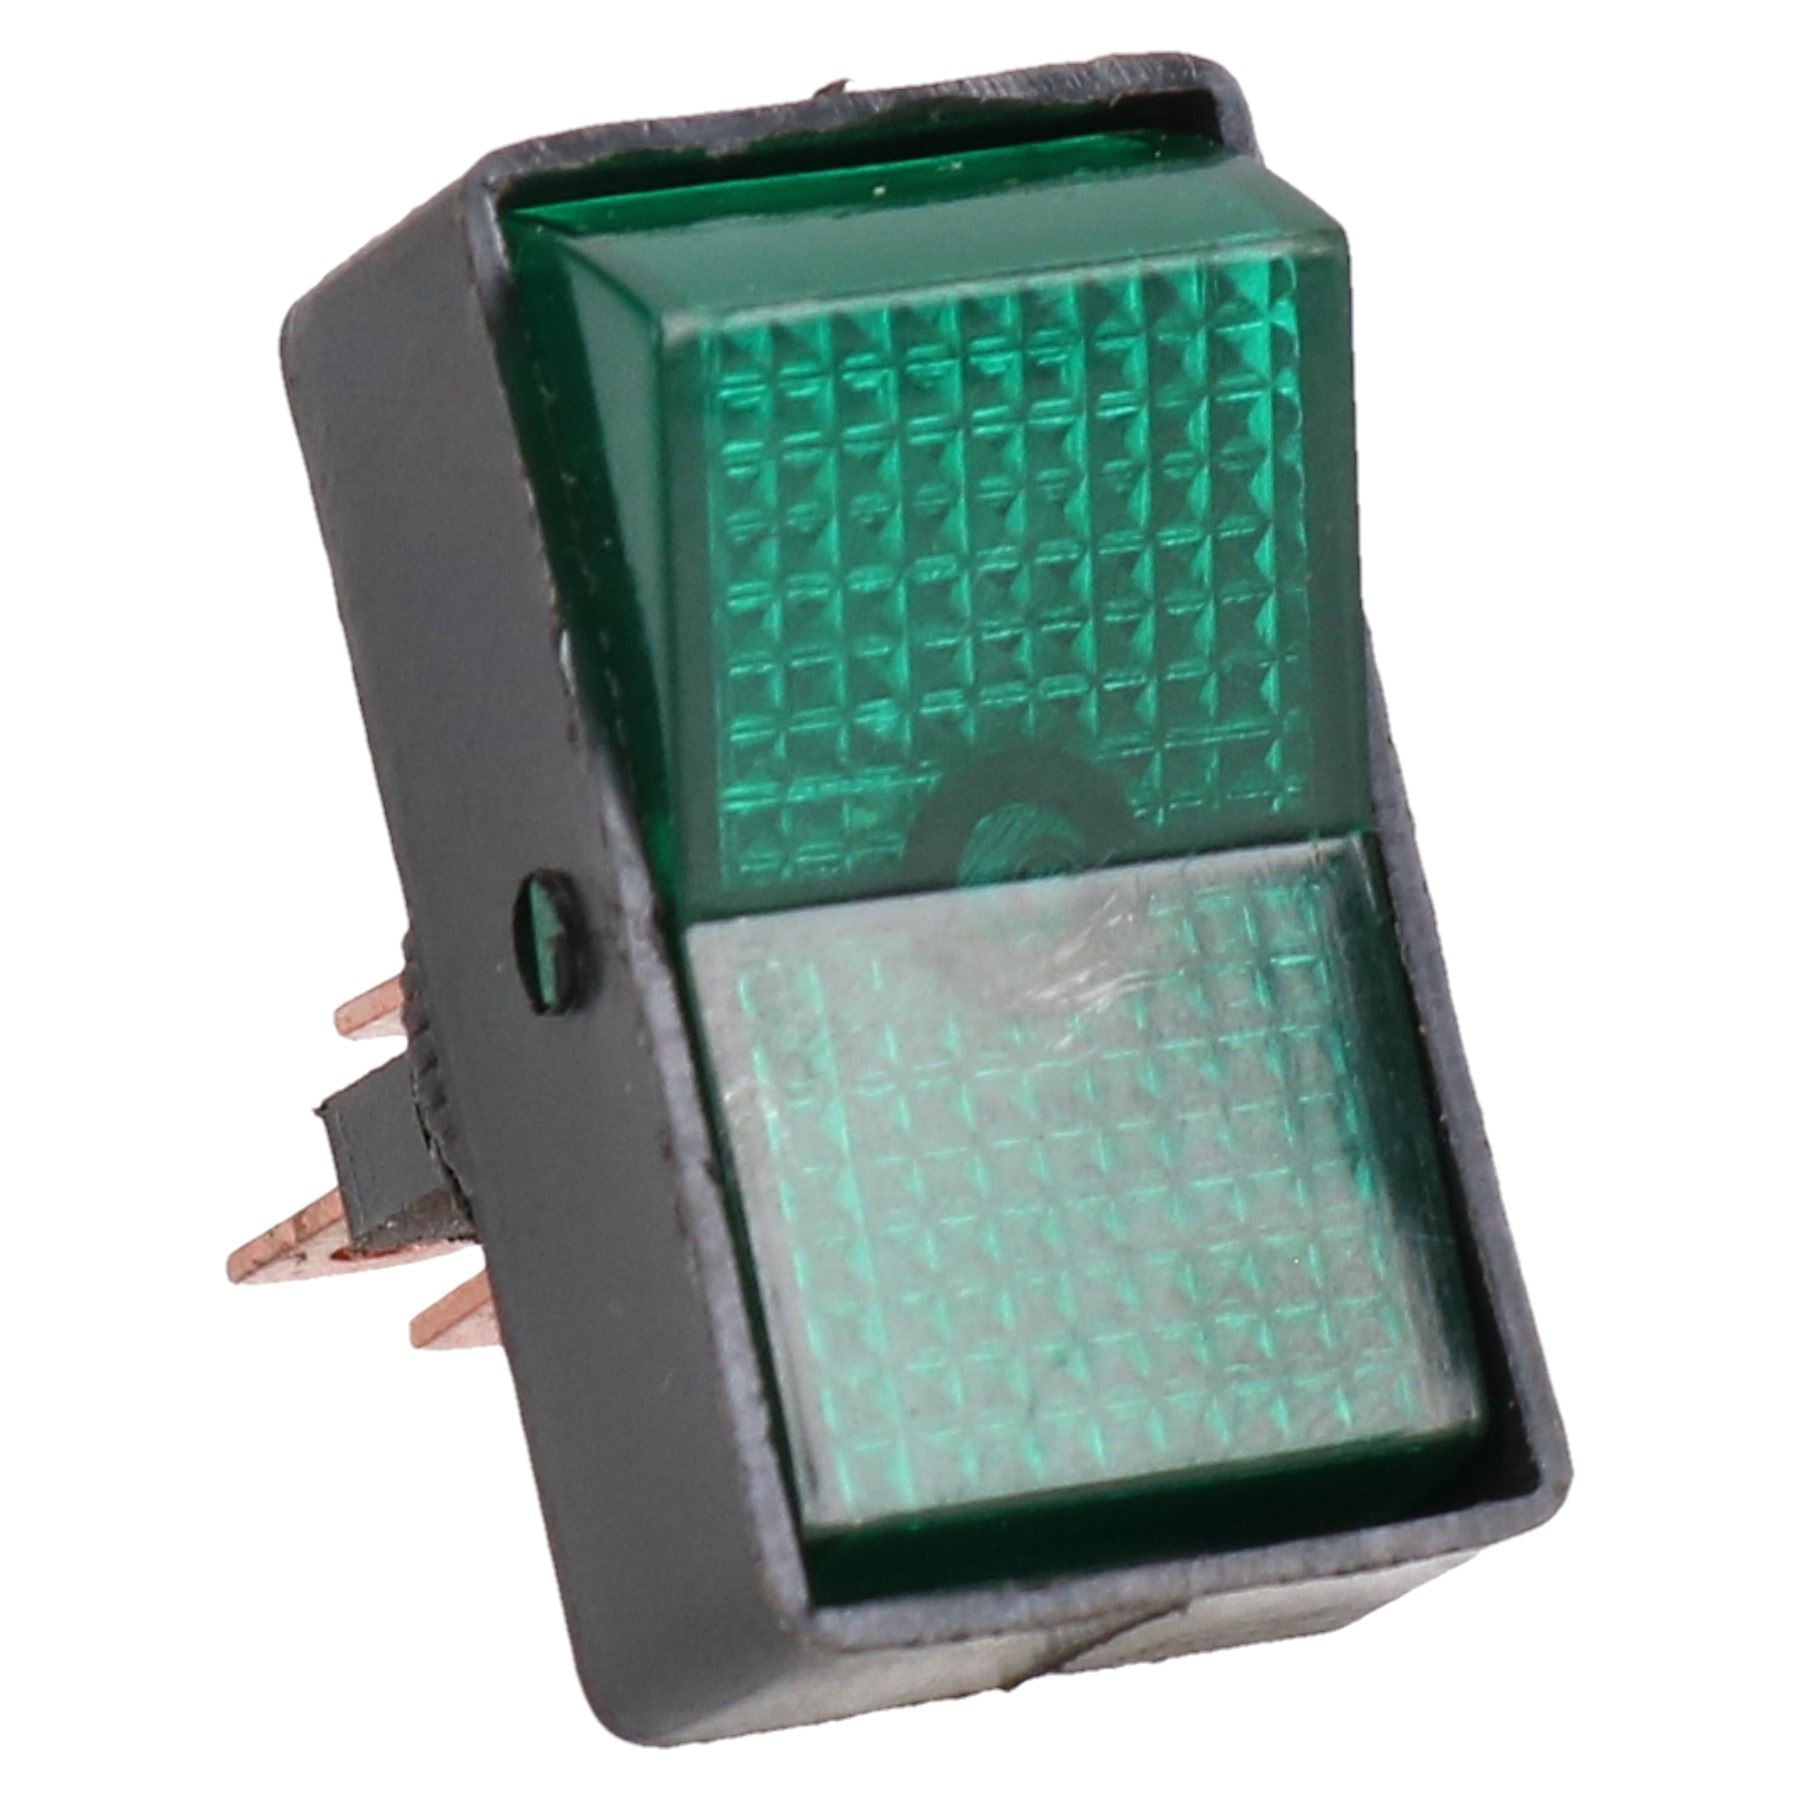 Green Rocker Switch Illuminated ABS Plastic 12V 16 Amp On / Off Car Dashboard